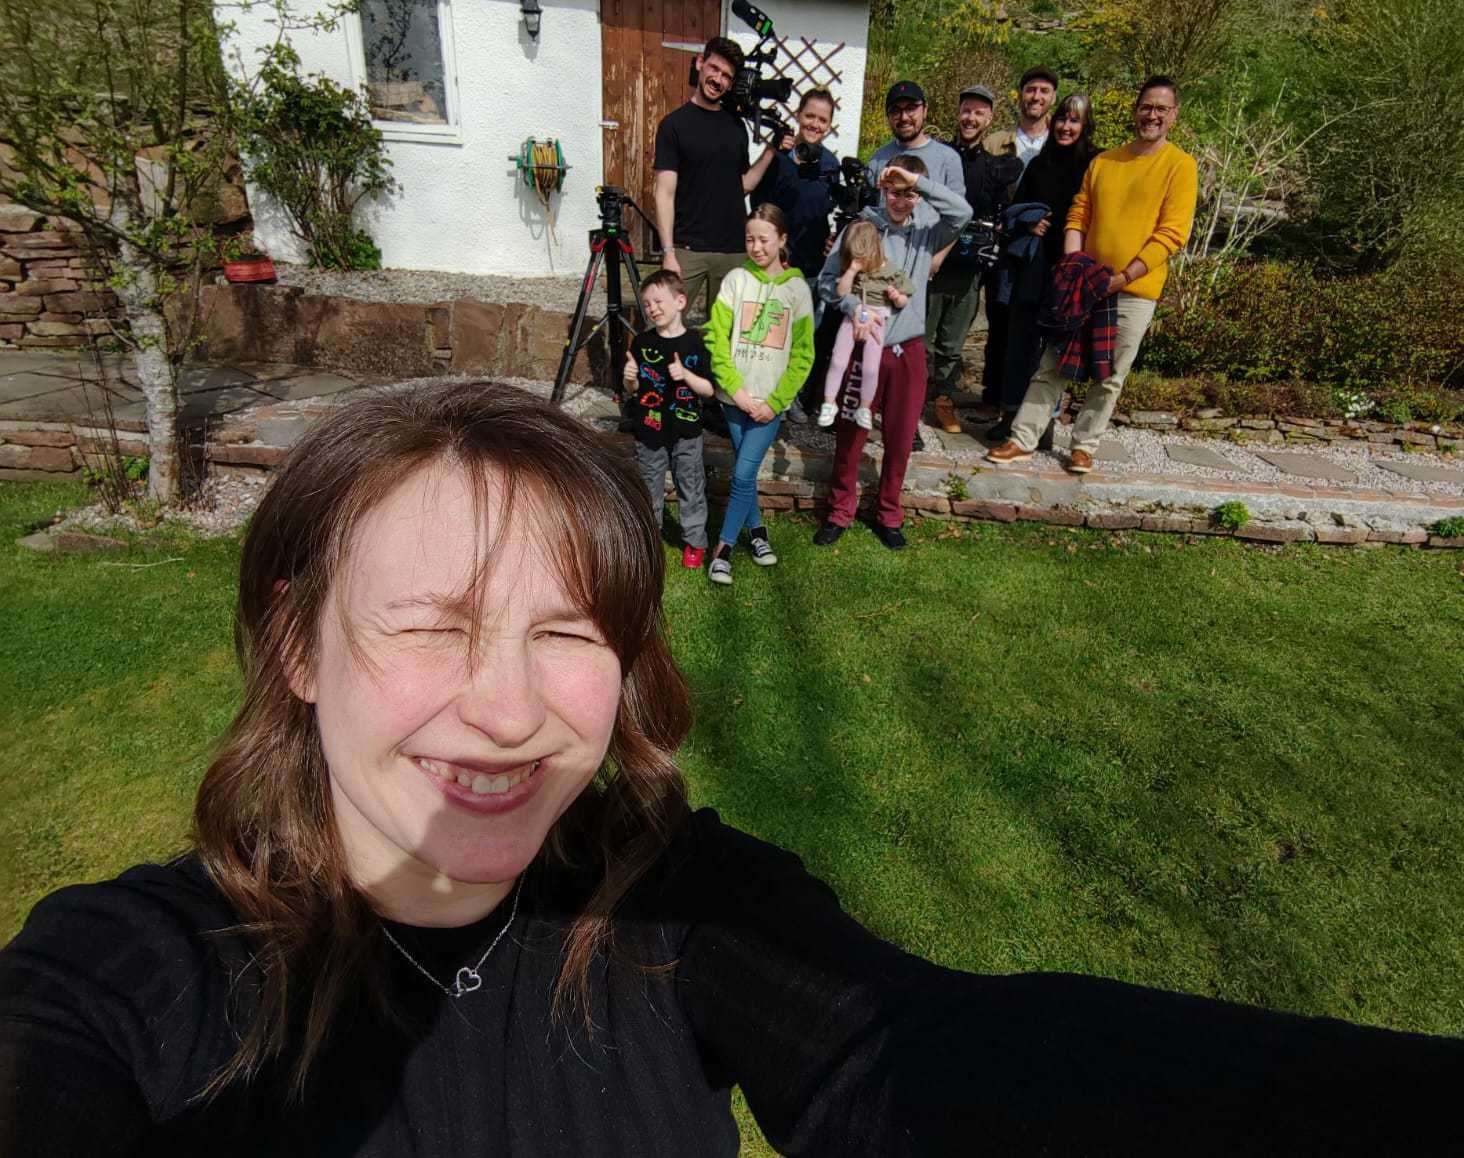 Selfie time with Escape to the Country presenter Alistair Appleton and the crew from the BBC. Picture: Kayleigh Macleod